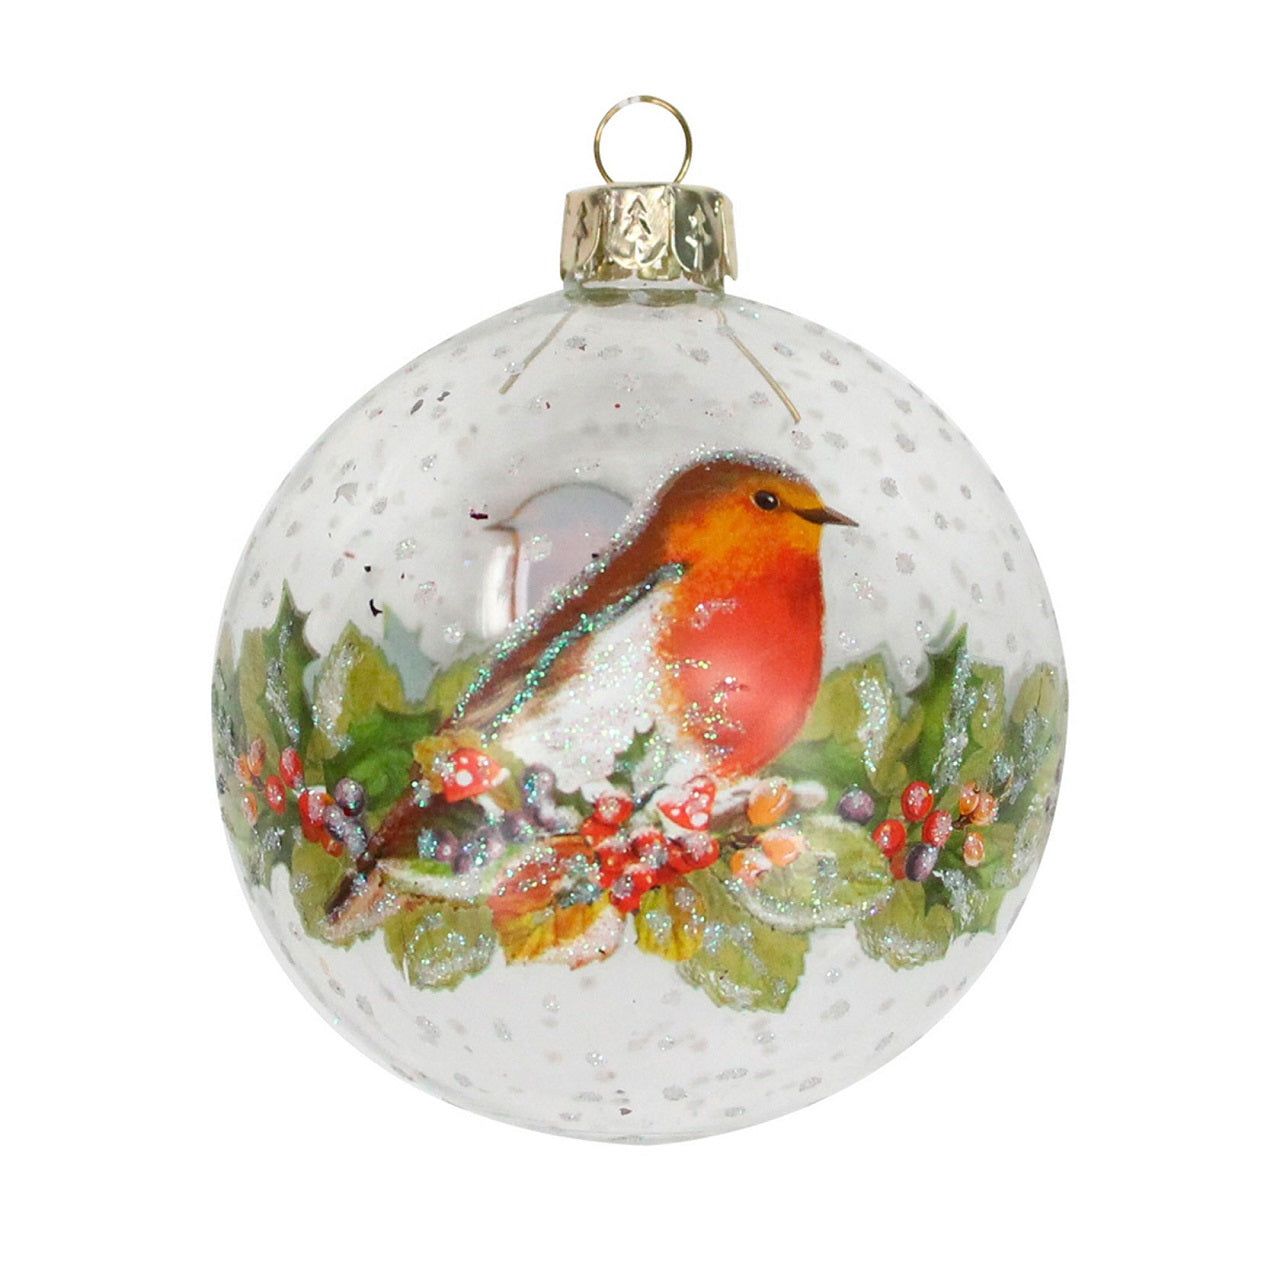 Gisela Graham Glass Bauble with Robin Christmas Decoration  Browse our beautiful range of luxury Christmas tree decorations and ornaments for your tree this Christmas.  Add style to your Christmas tree with this beautiful glass bauble decorated with a robin Christmas hanging ornament.